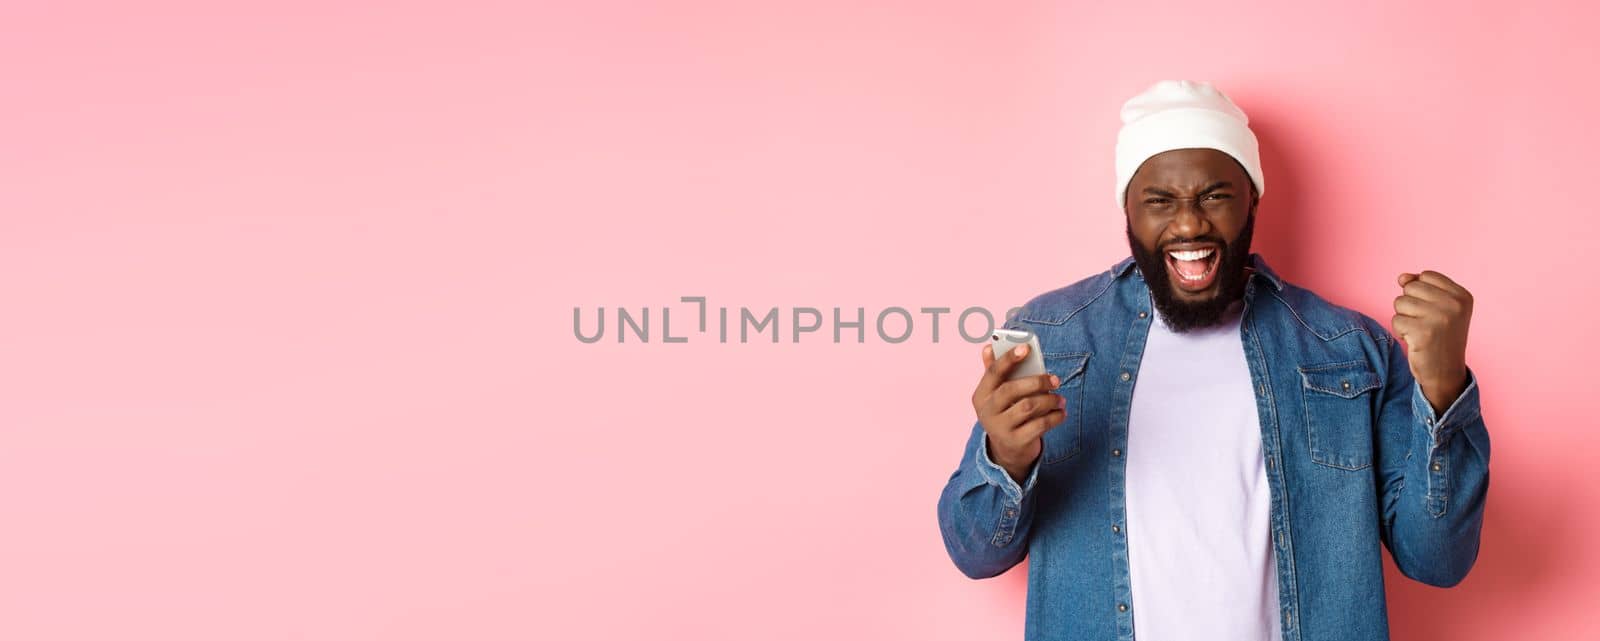 Technology and online shopping concept. Happy Black man rejoicing, winning in app, holding smartphone and scream yes, standing over pink background.